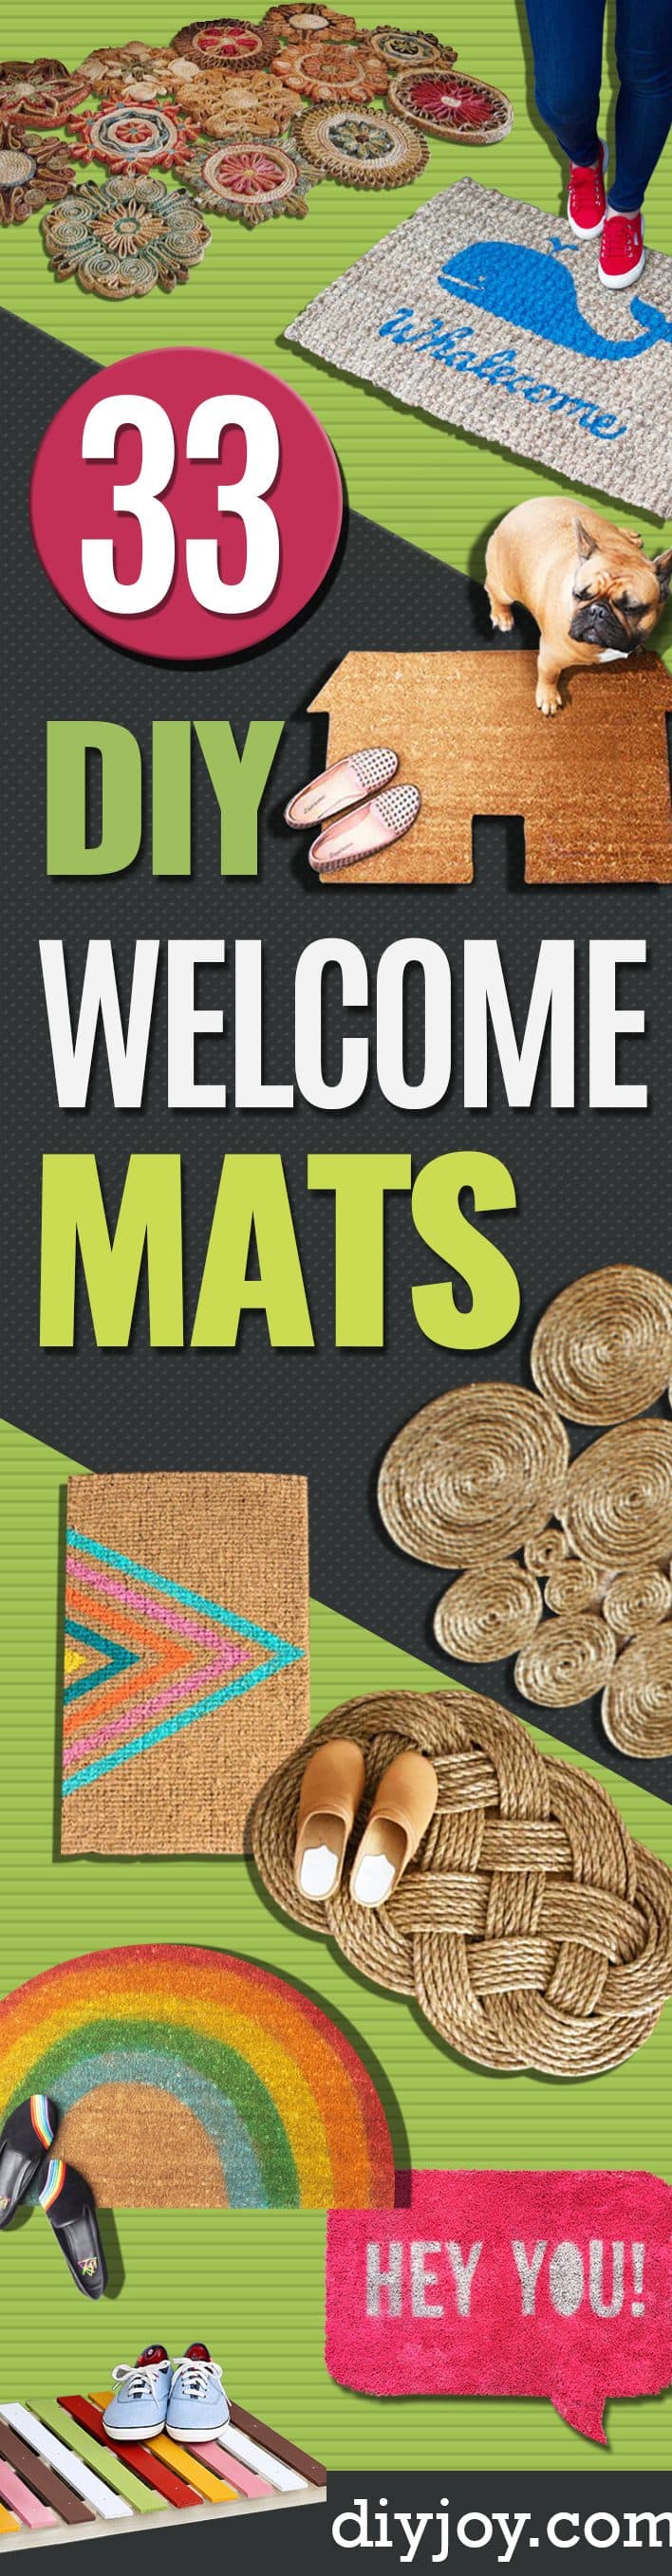 DIY Welcome Mats - Greet Guests in Style with These Easy and Cheap Home Decor Ideas for Your Entry. Doormat Tutorials for Creative Ways to Cover Your Floors and Front Door 